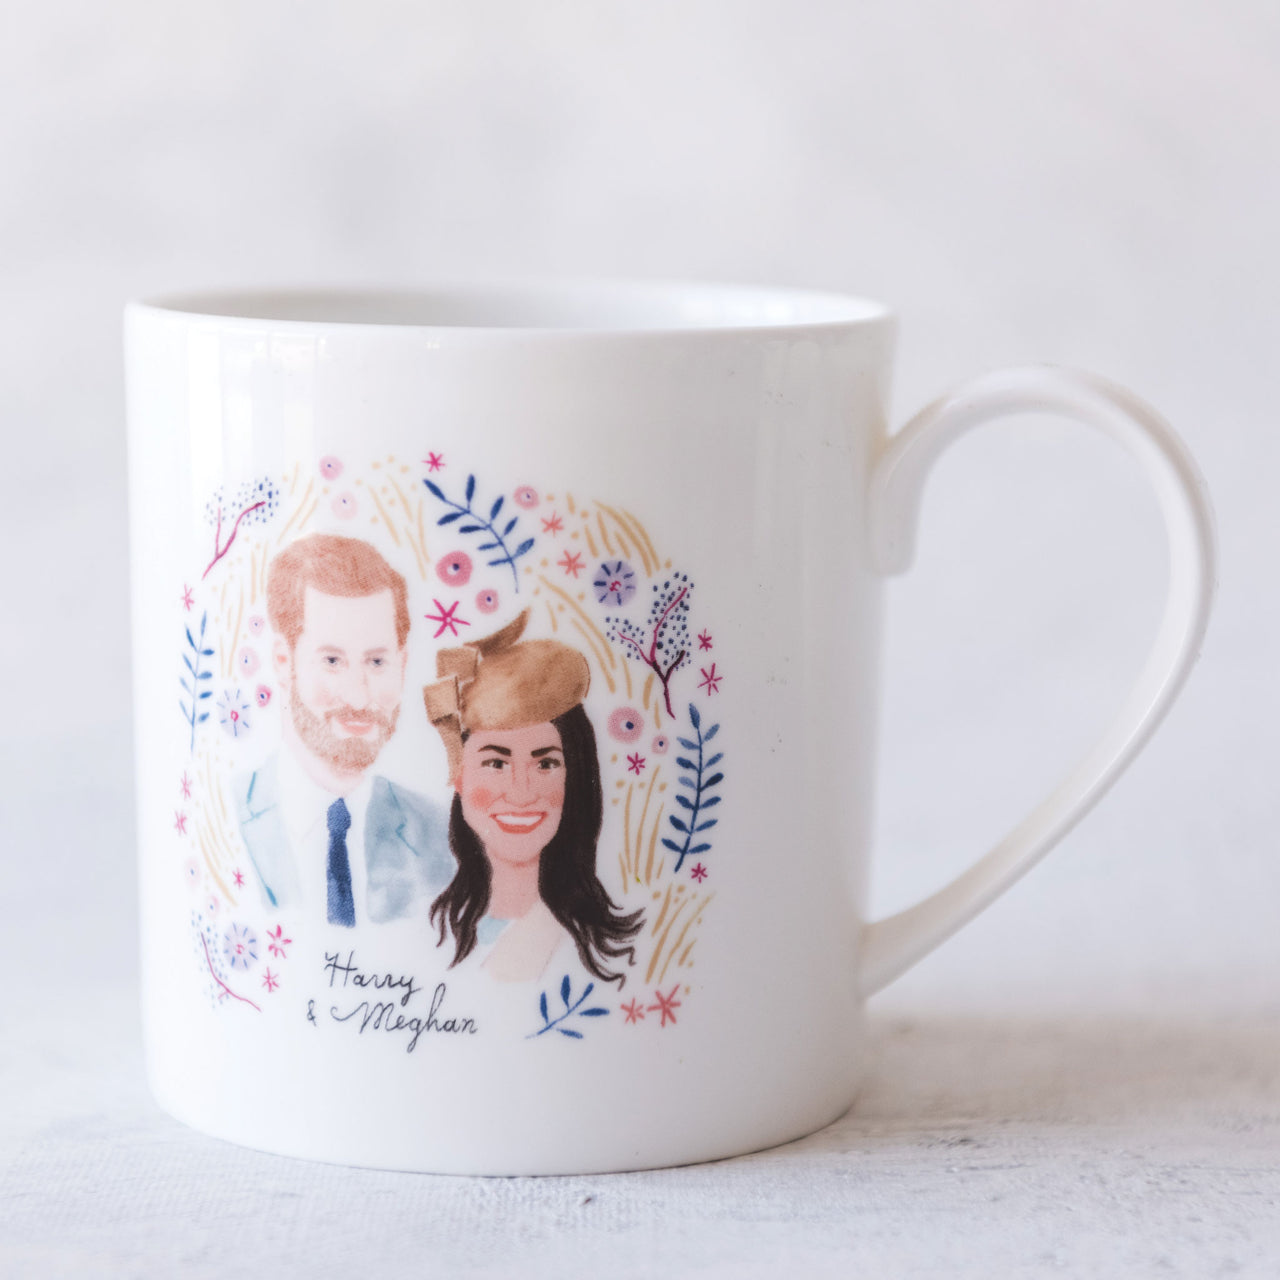 Illustration of Harry & Meghan on a mug to celebrate their marriage.